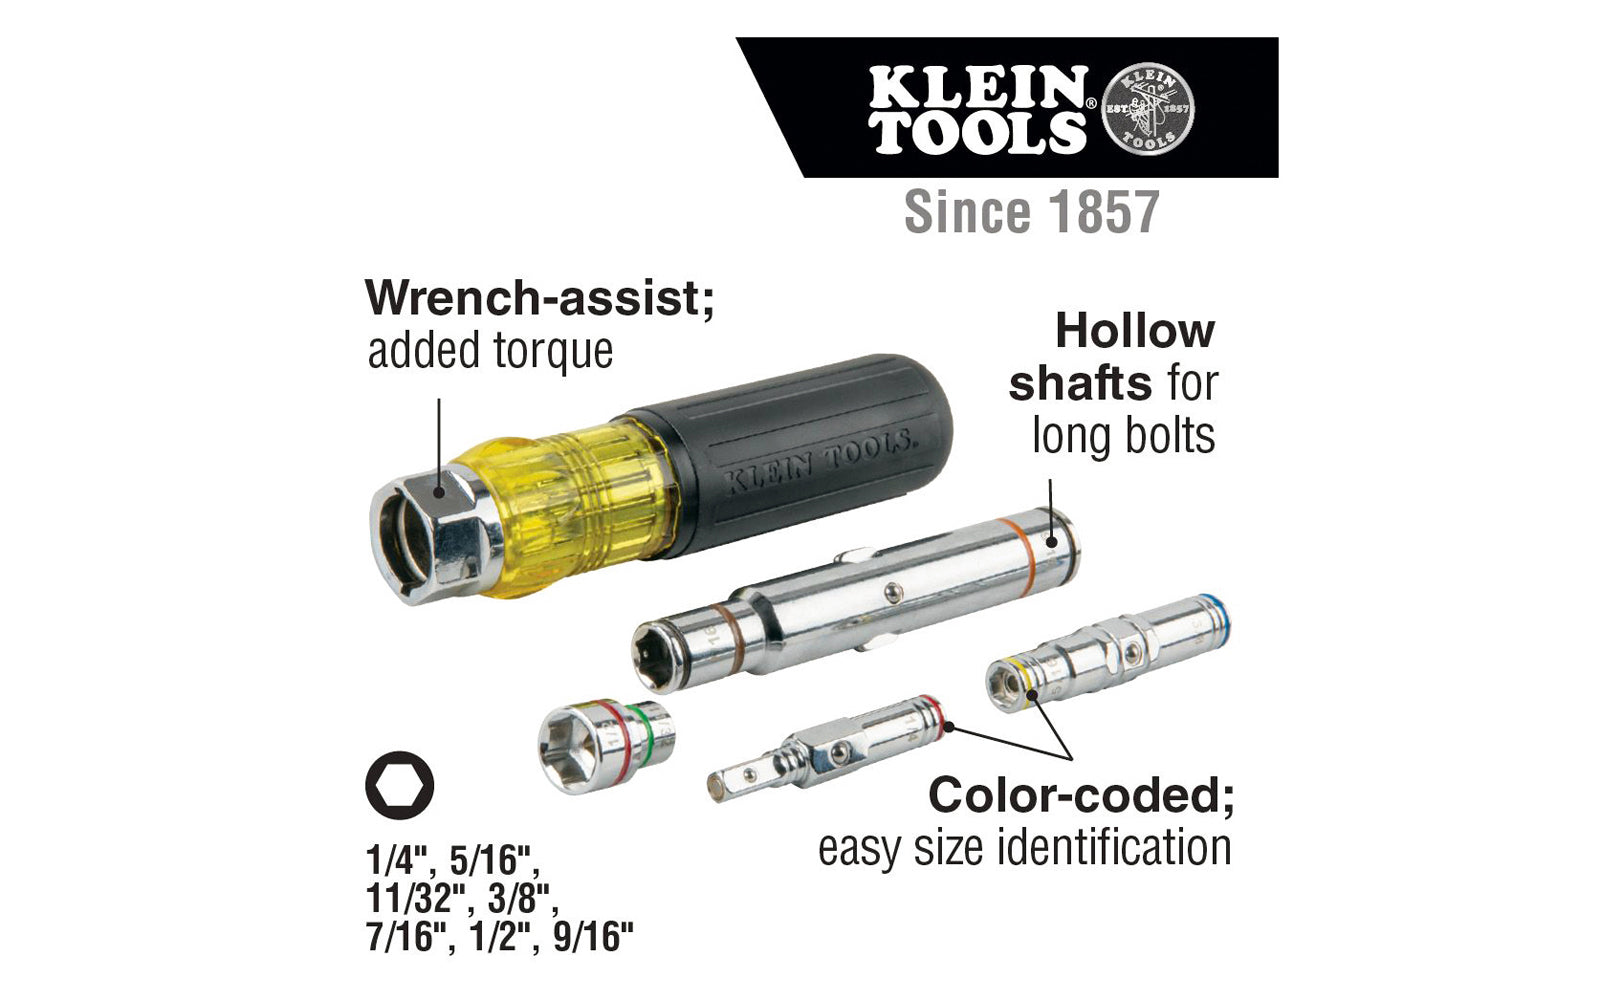 This Klein Tools 7-in-1 Nut Driver / Screwdriver allows for easy, one-handed driving. Sizes are interchangeable ensuring you have the size you need. Color coded shaft ends make it easy to identify size. Nut Driver Sizes: 1/4'', 5/16'', 11/32'', 3/8'', 1/2'', 7/16'', 9/16'' Model 32807MAG. 092644328084. Multi-Nut Driver